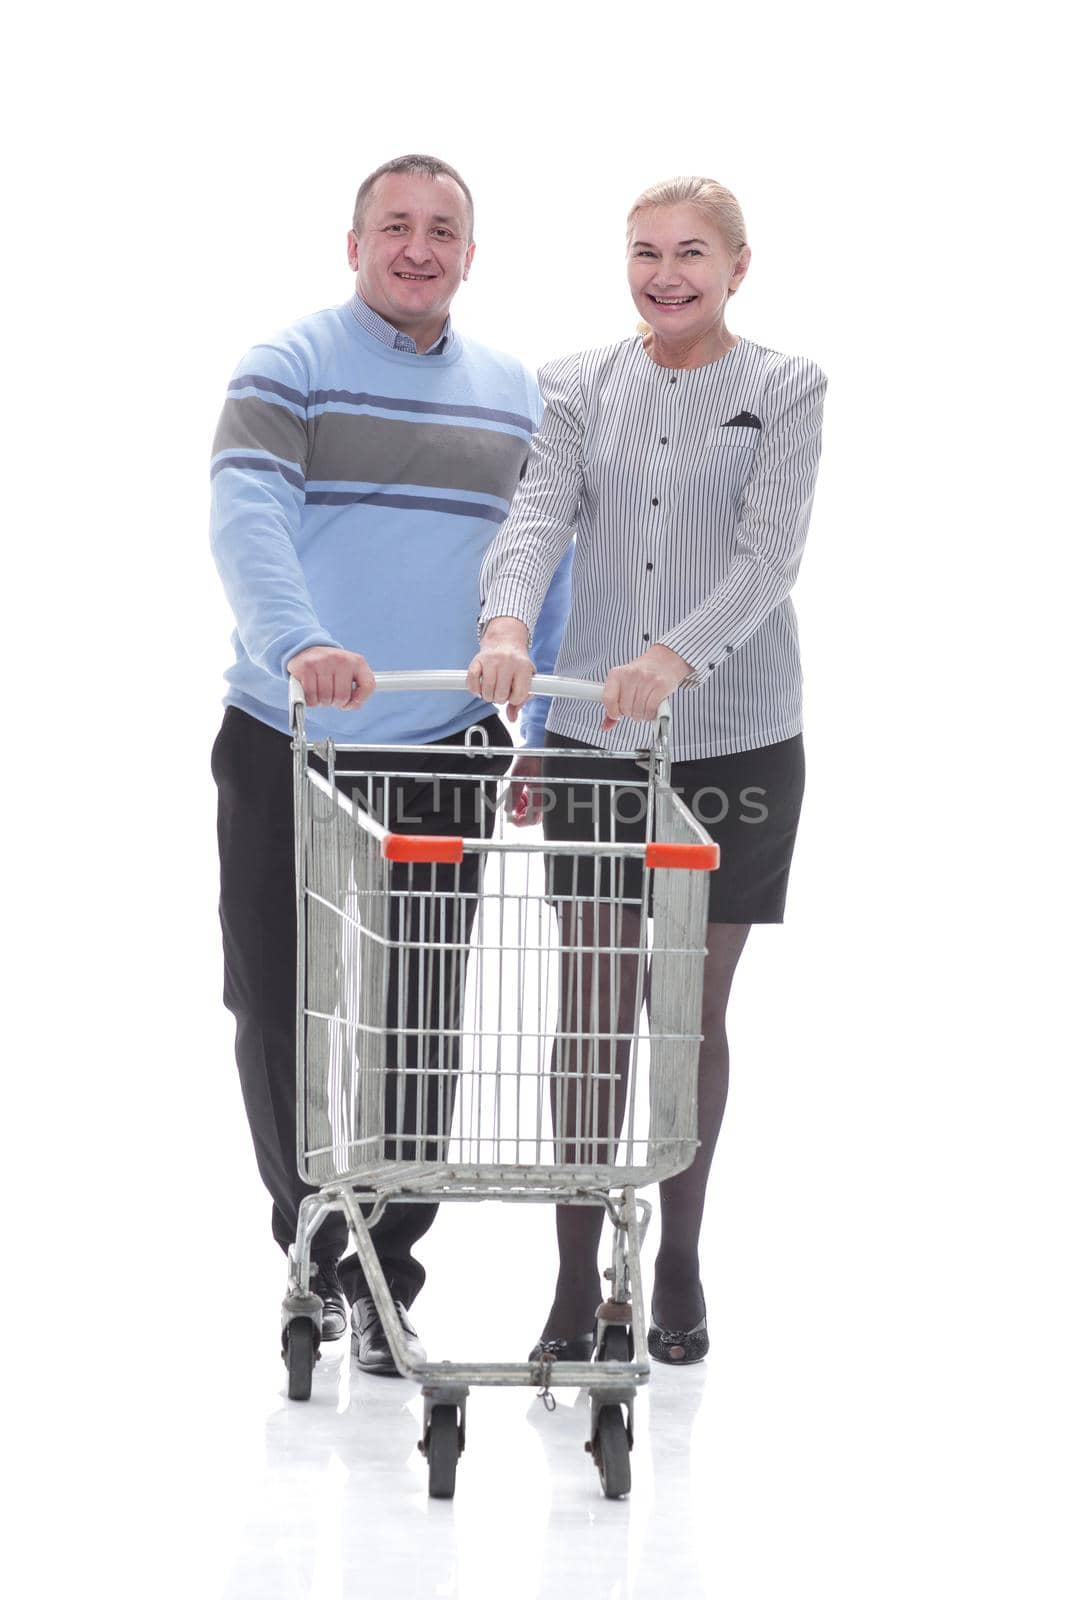 in full growth. casual couple with shopping cart . isolated on a white background